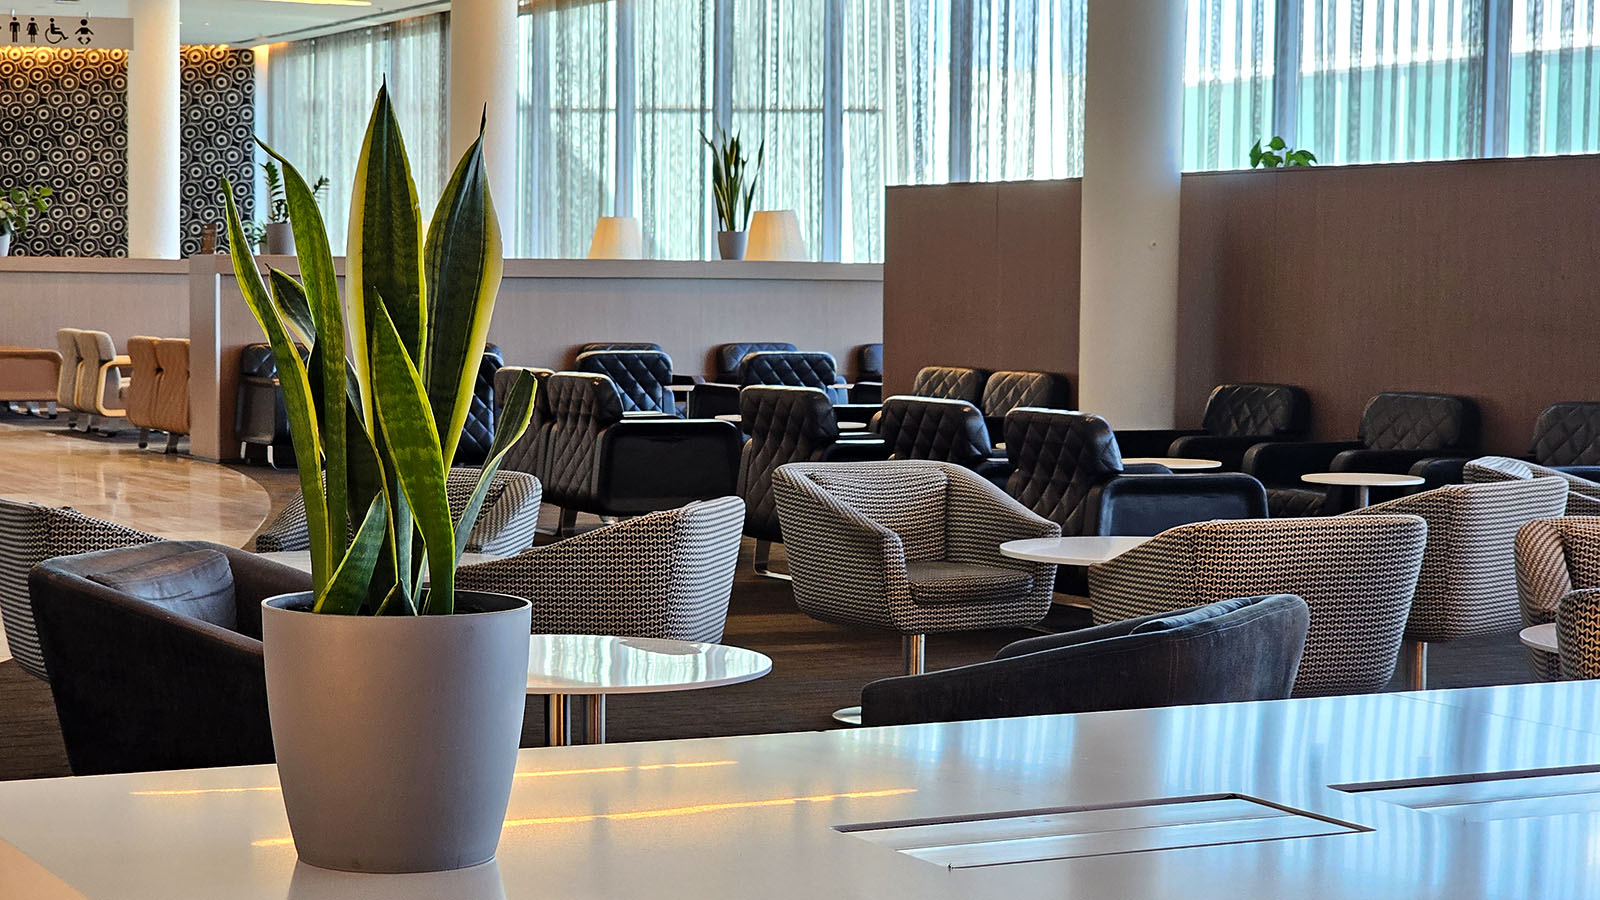 Inside Canberra's Qantas Domestic Business Lounge